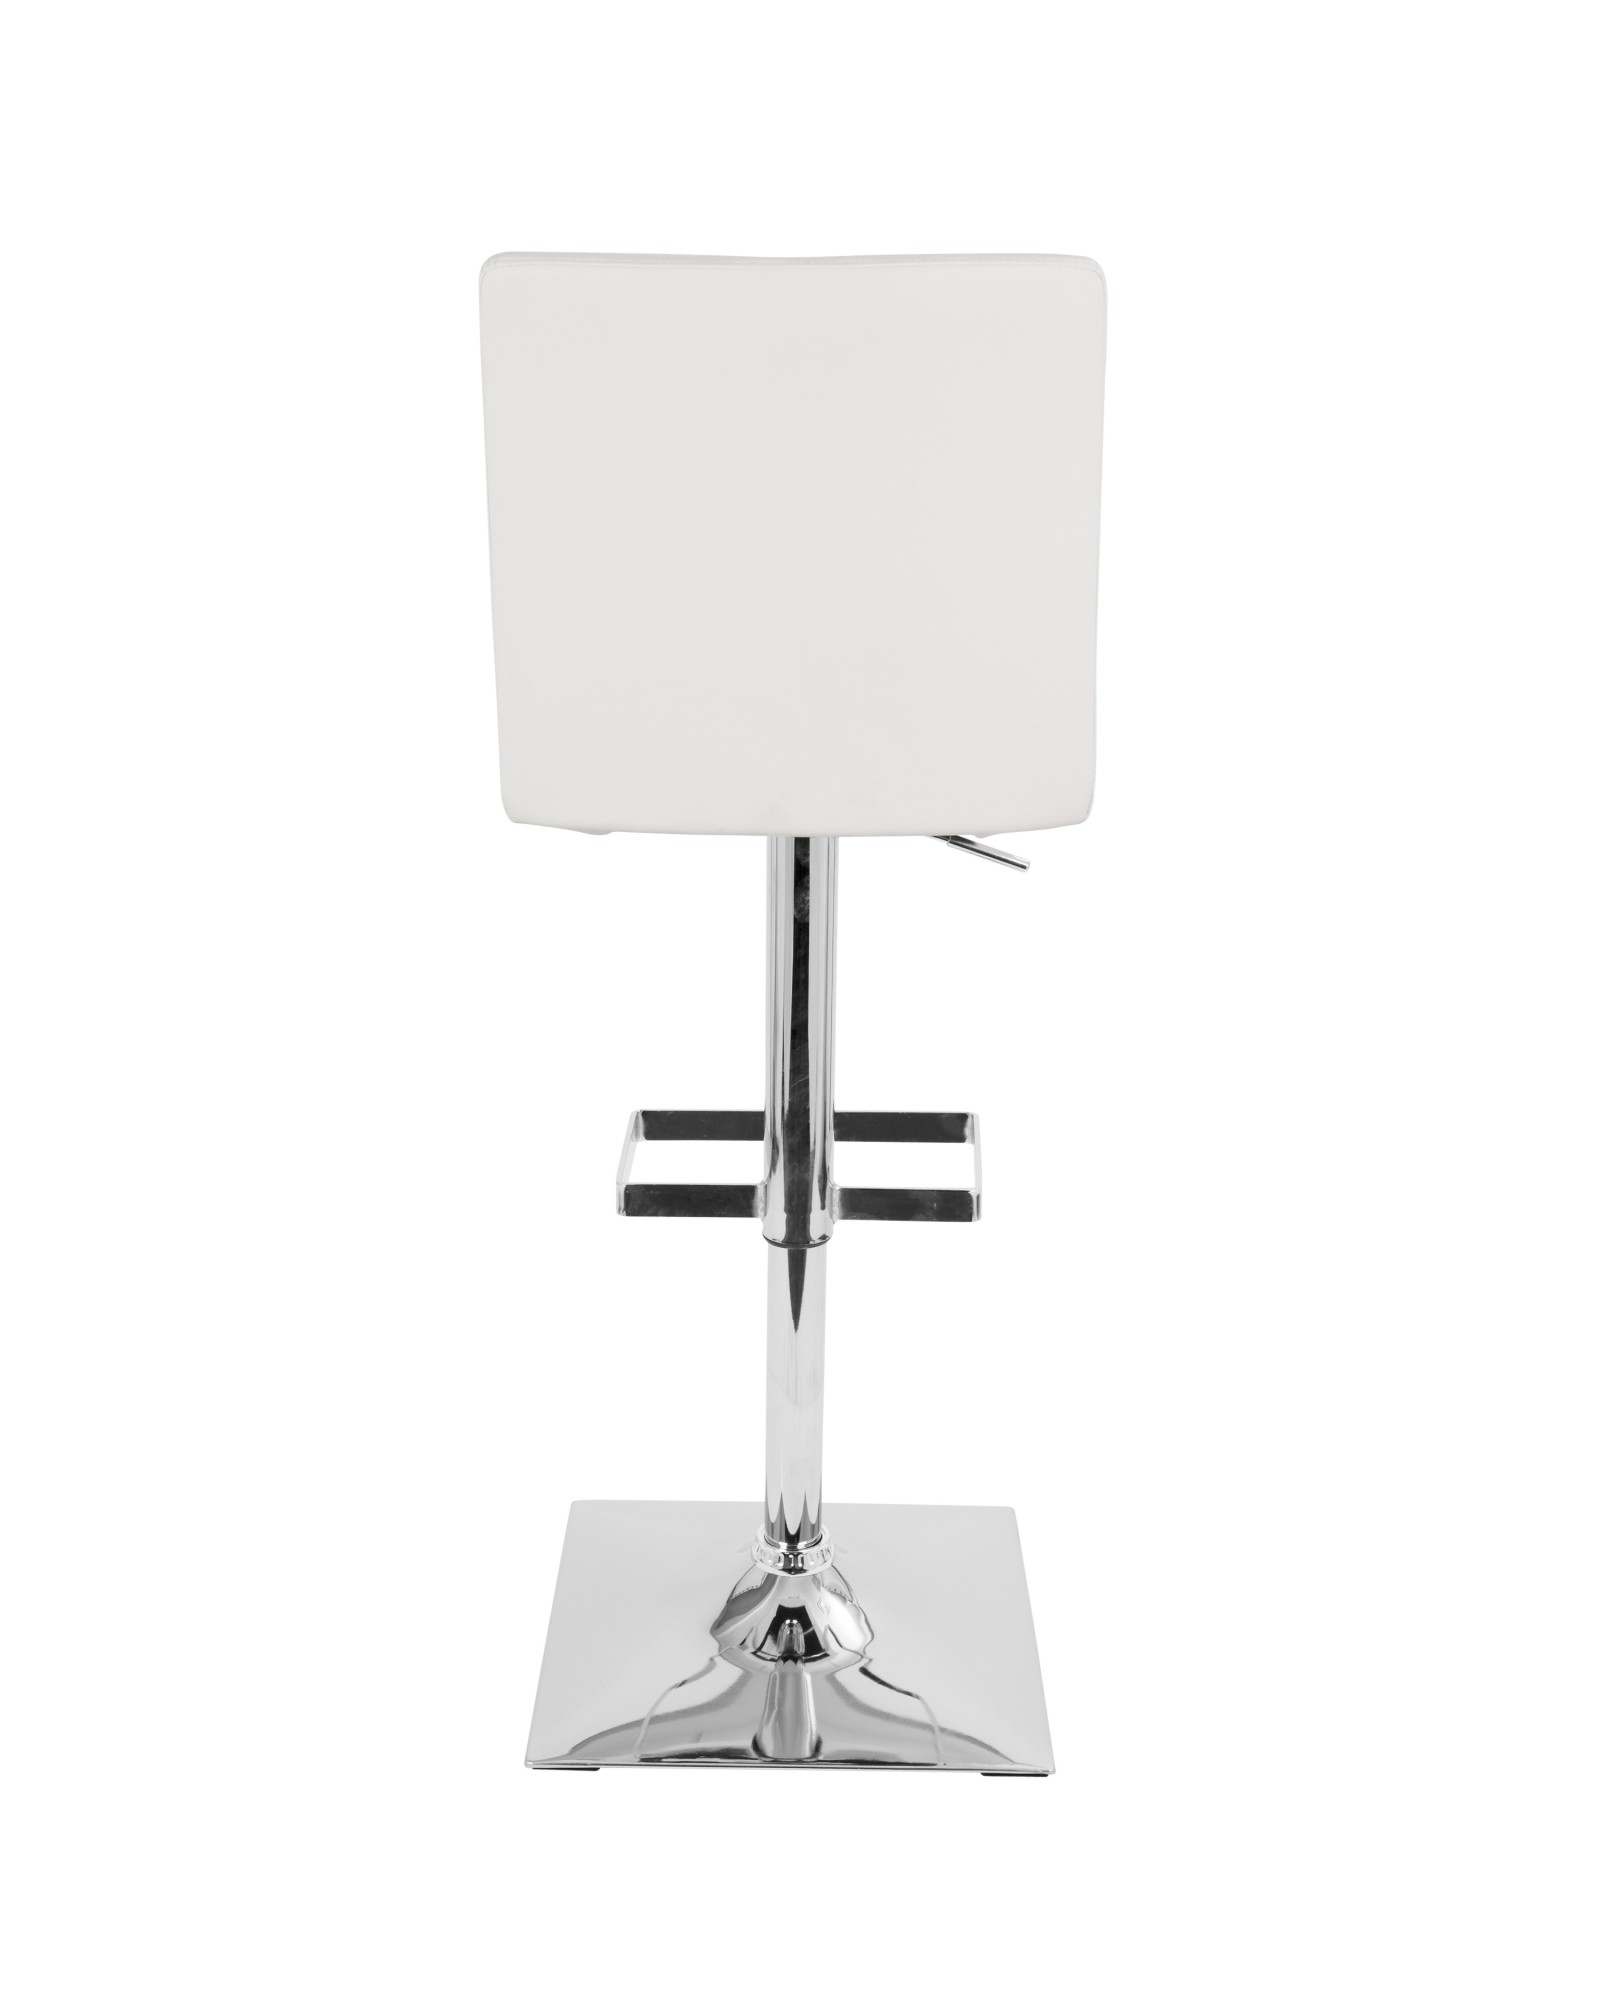 Captain Contemporary Adjustable Barstool with Swivel in White Faux Leather